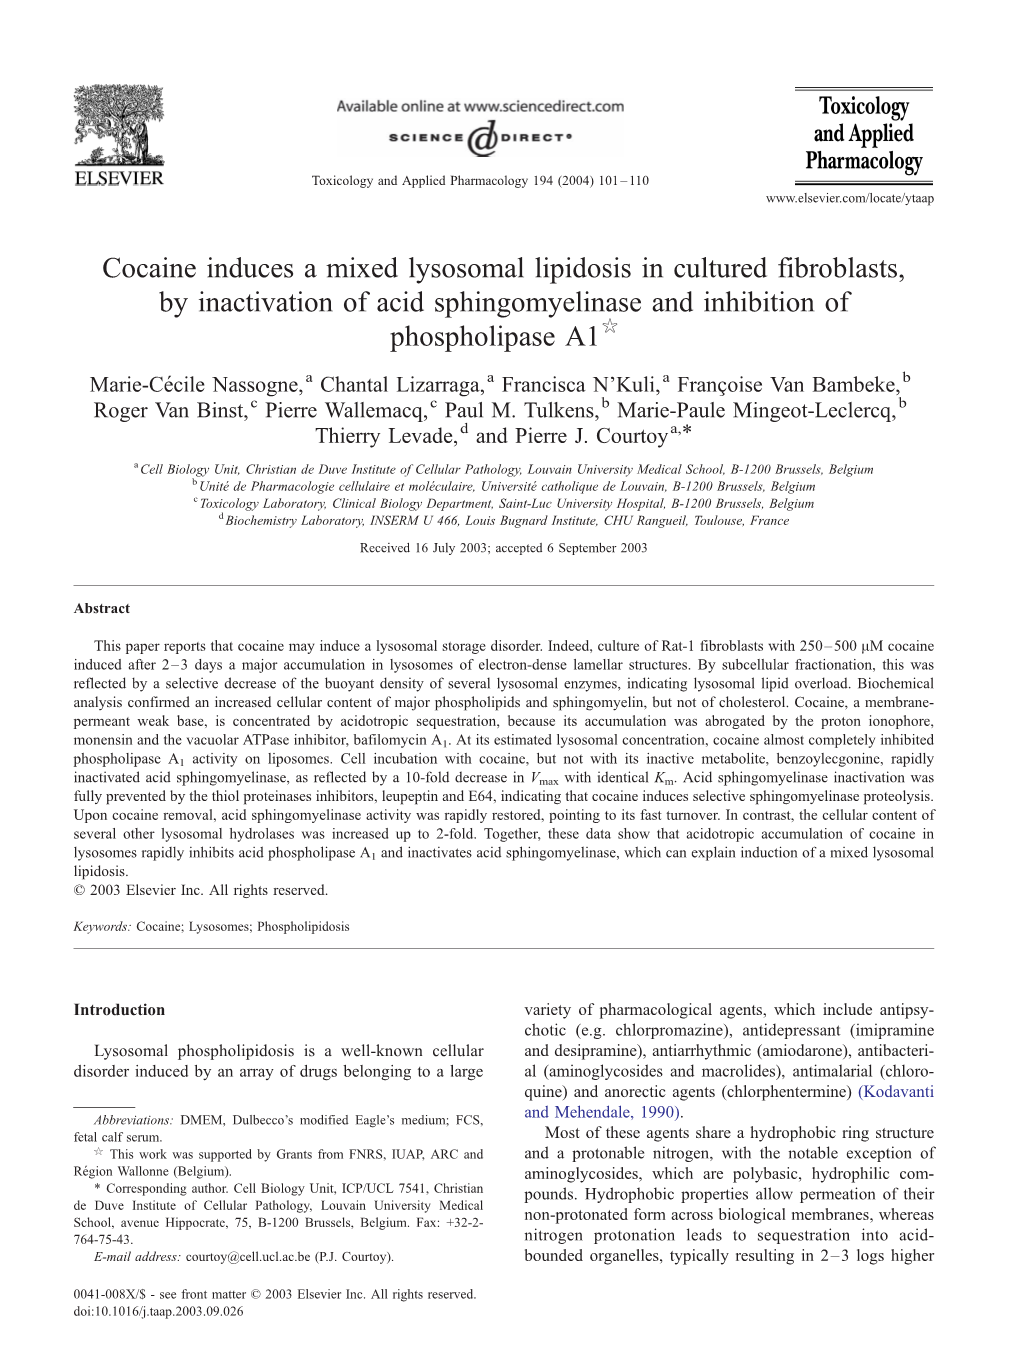 Cocaine Induces a Mixed Lysosomal Lipidosis in Cultured Fibroblasts, by Inactivation of Acid Sphingomyelinase and Inhibition of Phospholipase A1$